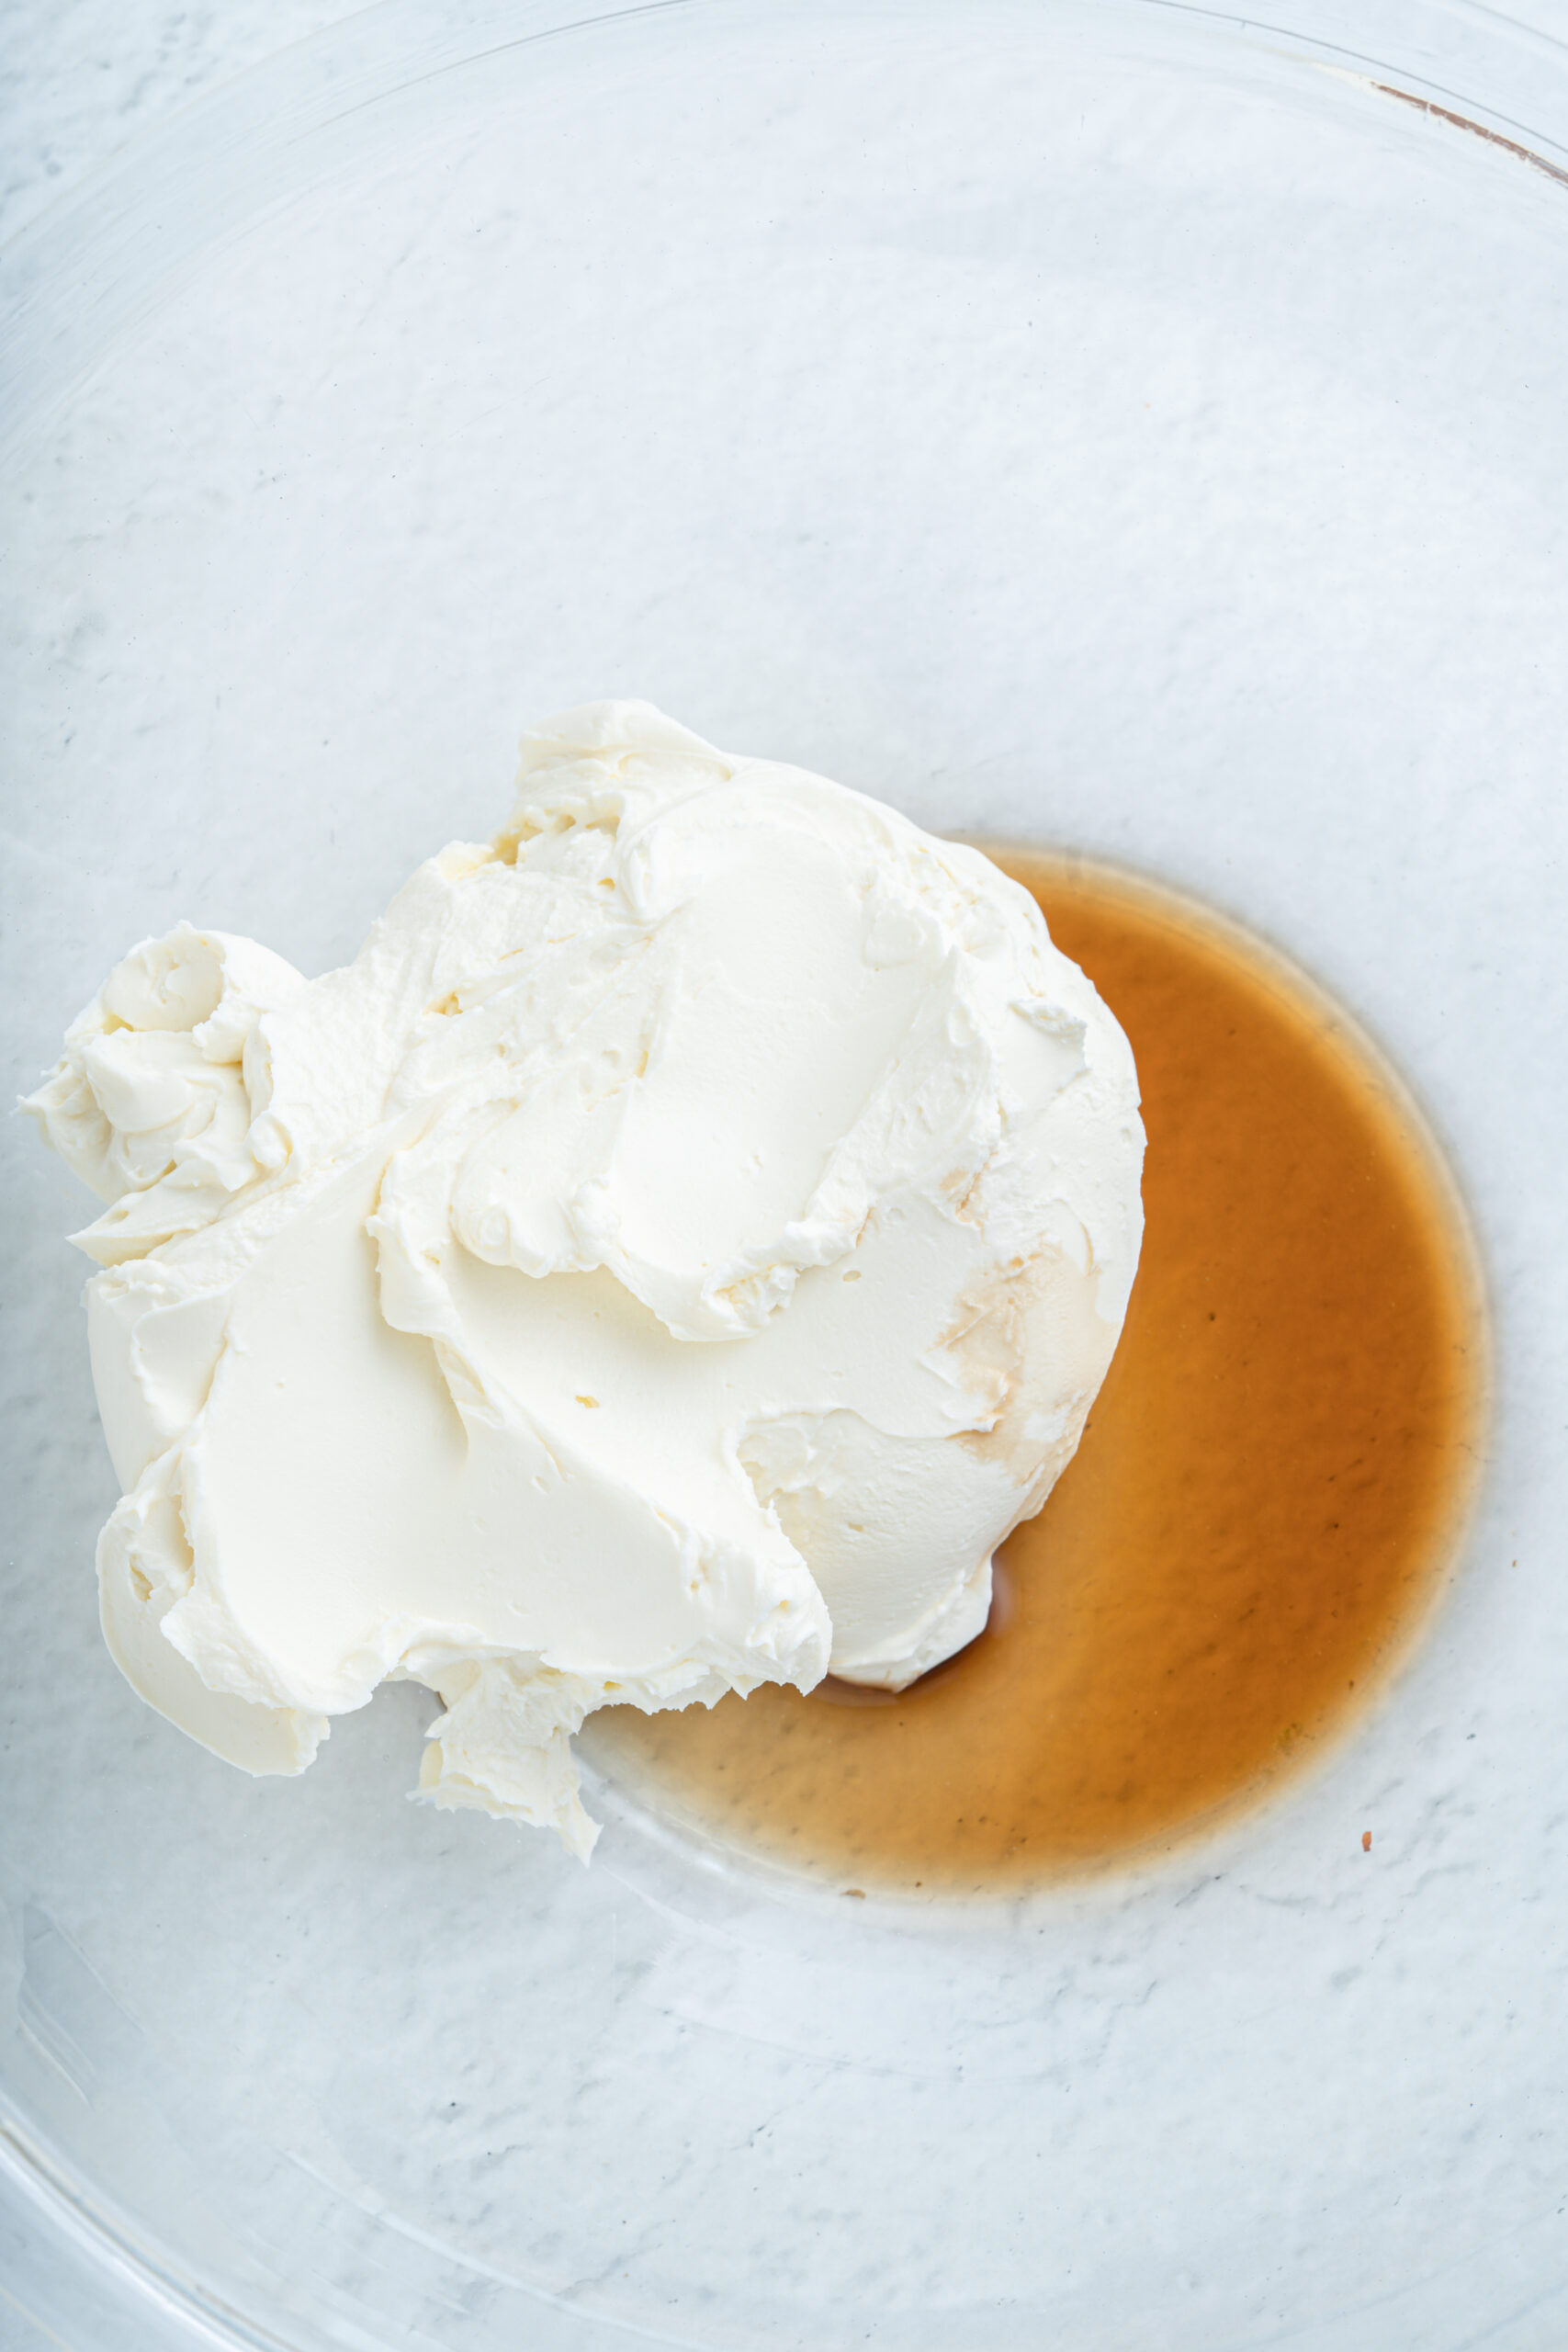 Cream cheese and vanilla in a bowl.